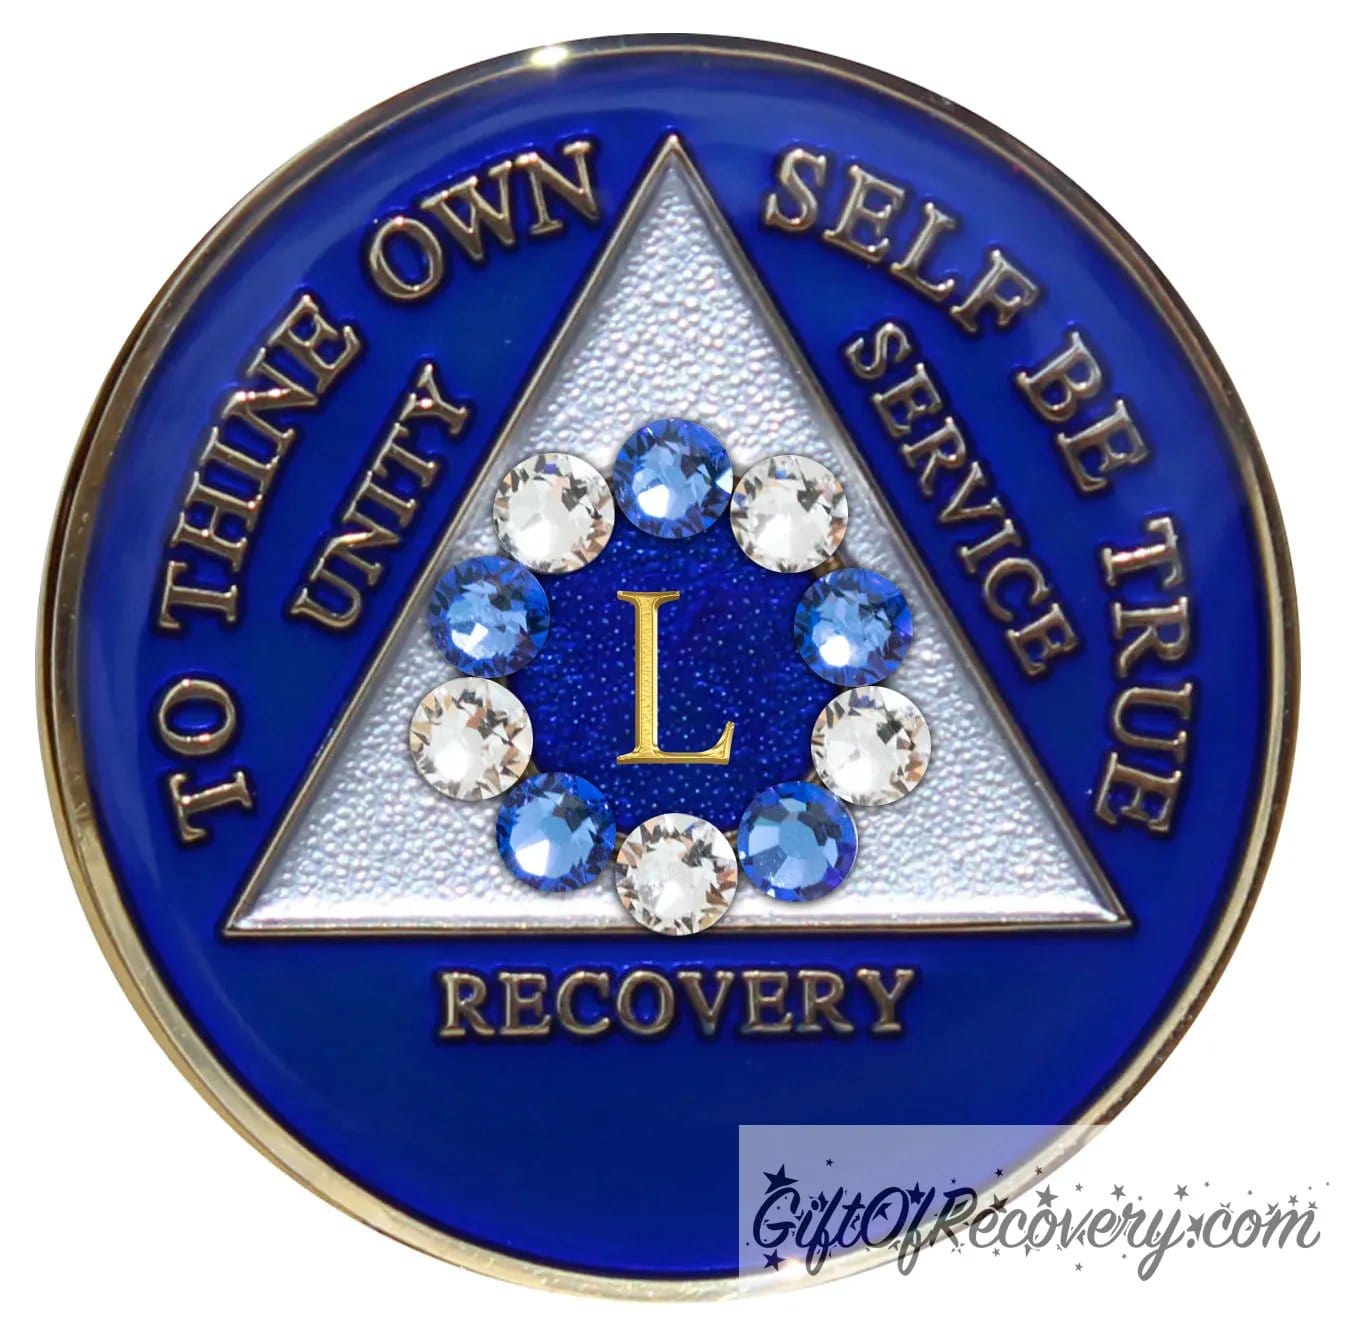 50 Year Big Book Blue AA medallion with 5 blue genuine crystals and 5 clear genuine crystal, making a circle around the 50 year, the recovery medallion has raised lettering to thine own self be true, and the outer rim of the medallion in 14k gold, inside the triangle is white and blue, emphasizing action and reflection.